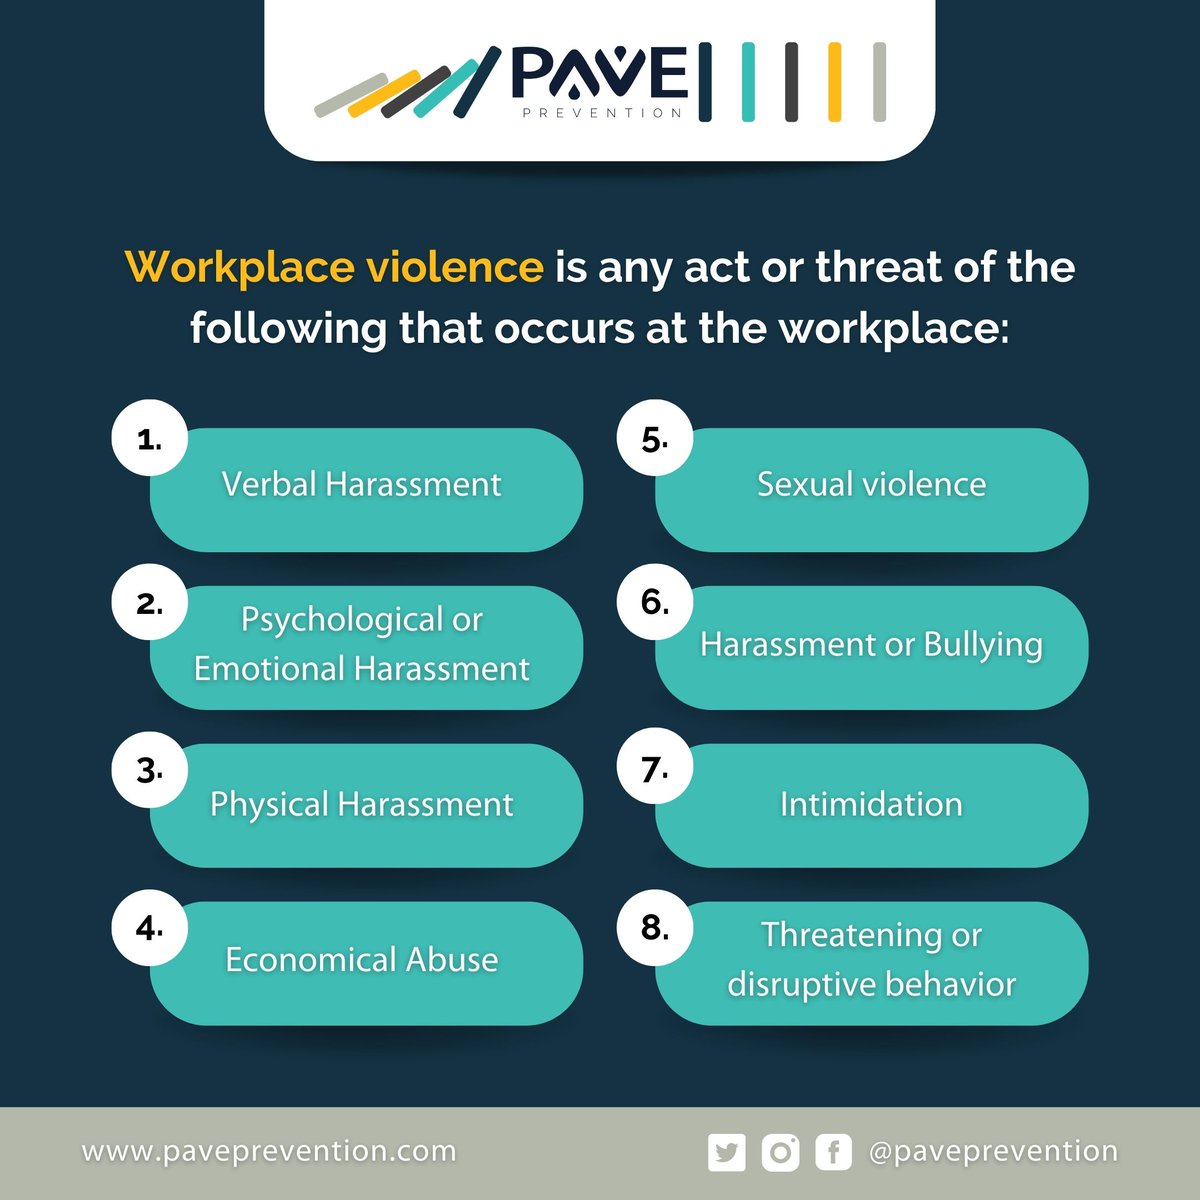 Workplace violence is any act or threat of the following that occurs at the workplace.
#PAVE #PAVEPrevention #SafetyTraining #SelfDefense #Violence #ViolencePrevention #WorkplaceViolencePrevention #SafetyAtWork #RespectAtWork #PreventionPrograms